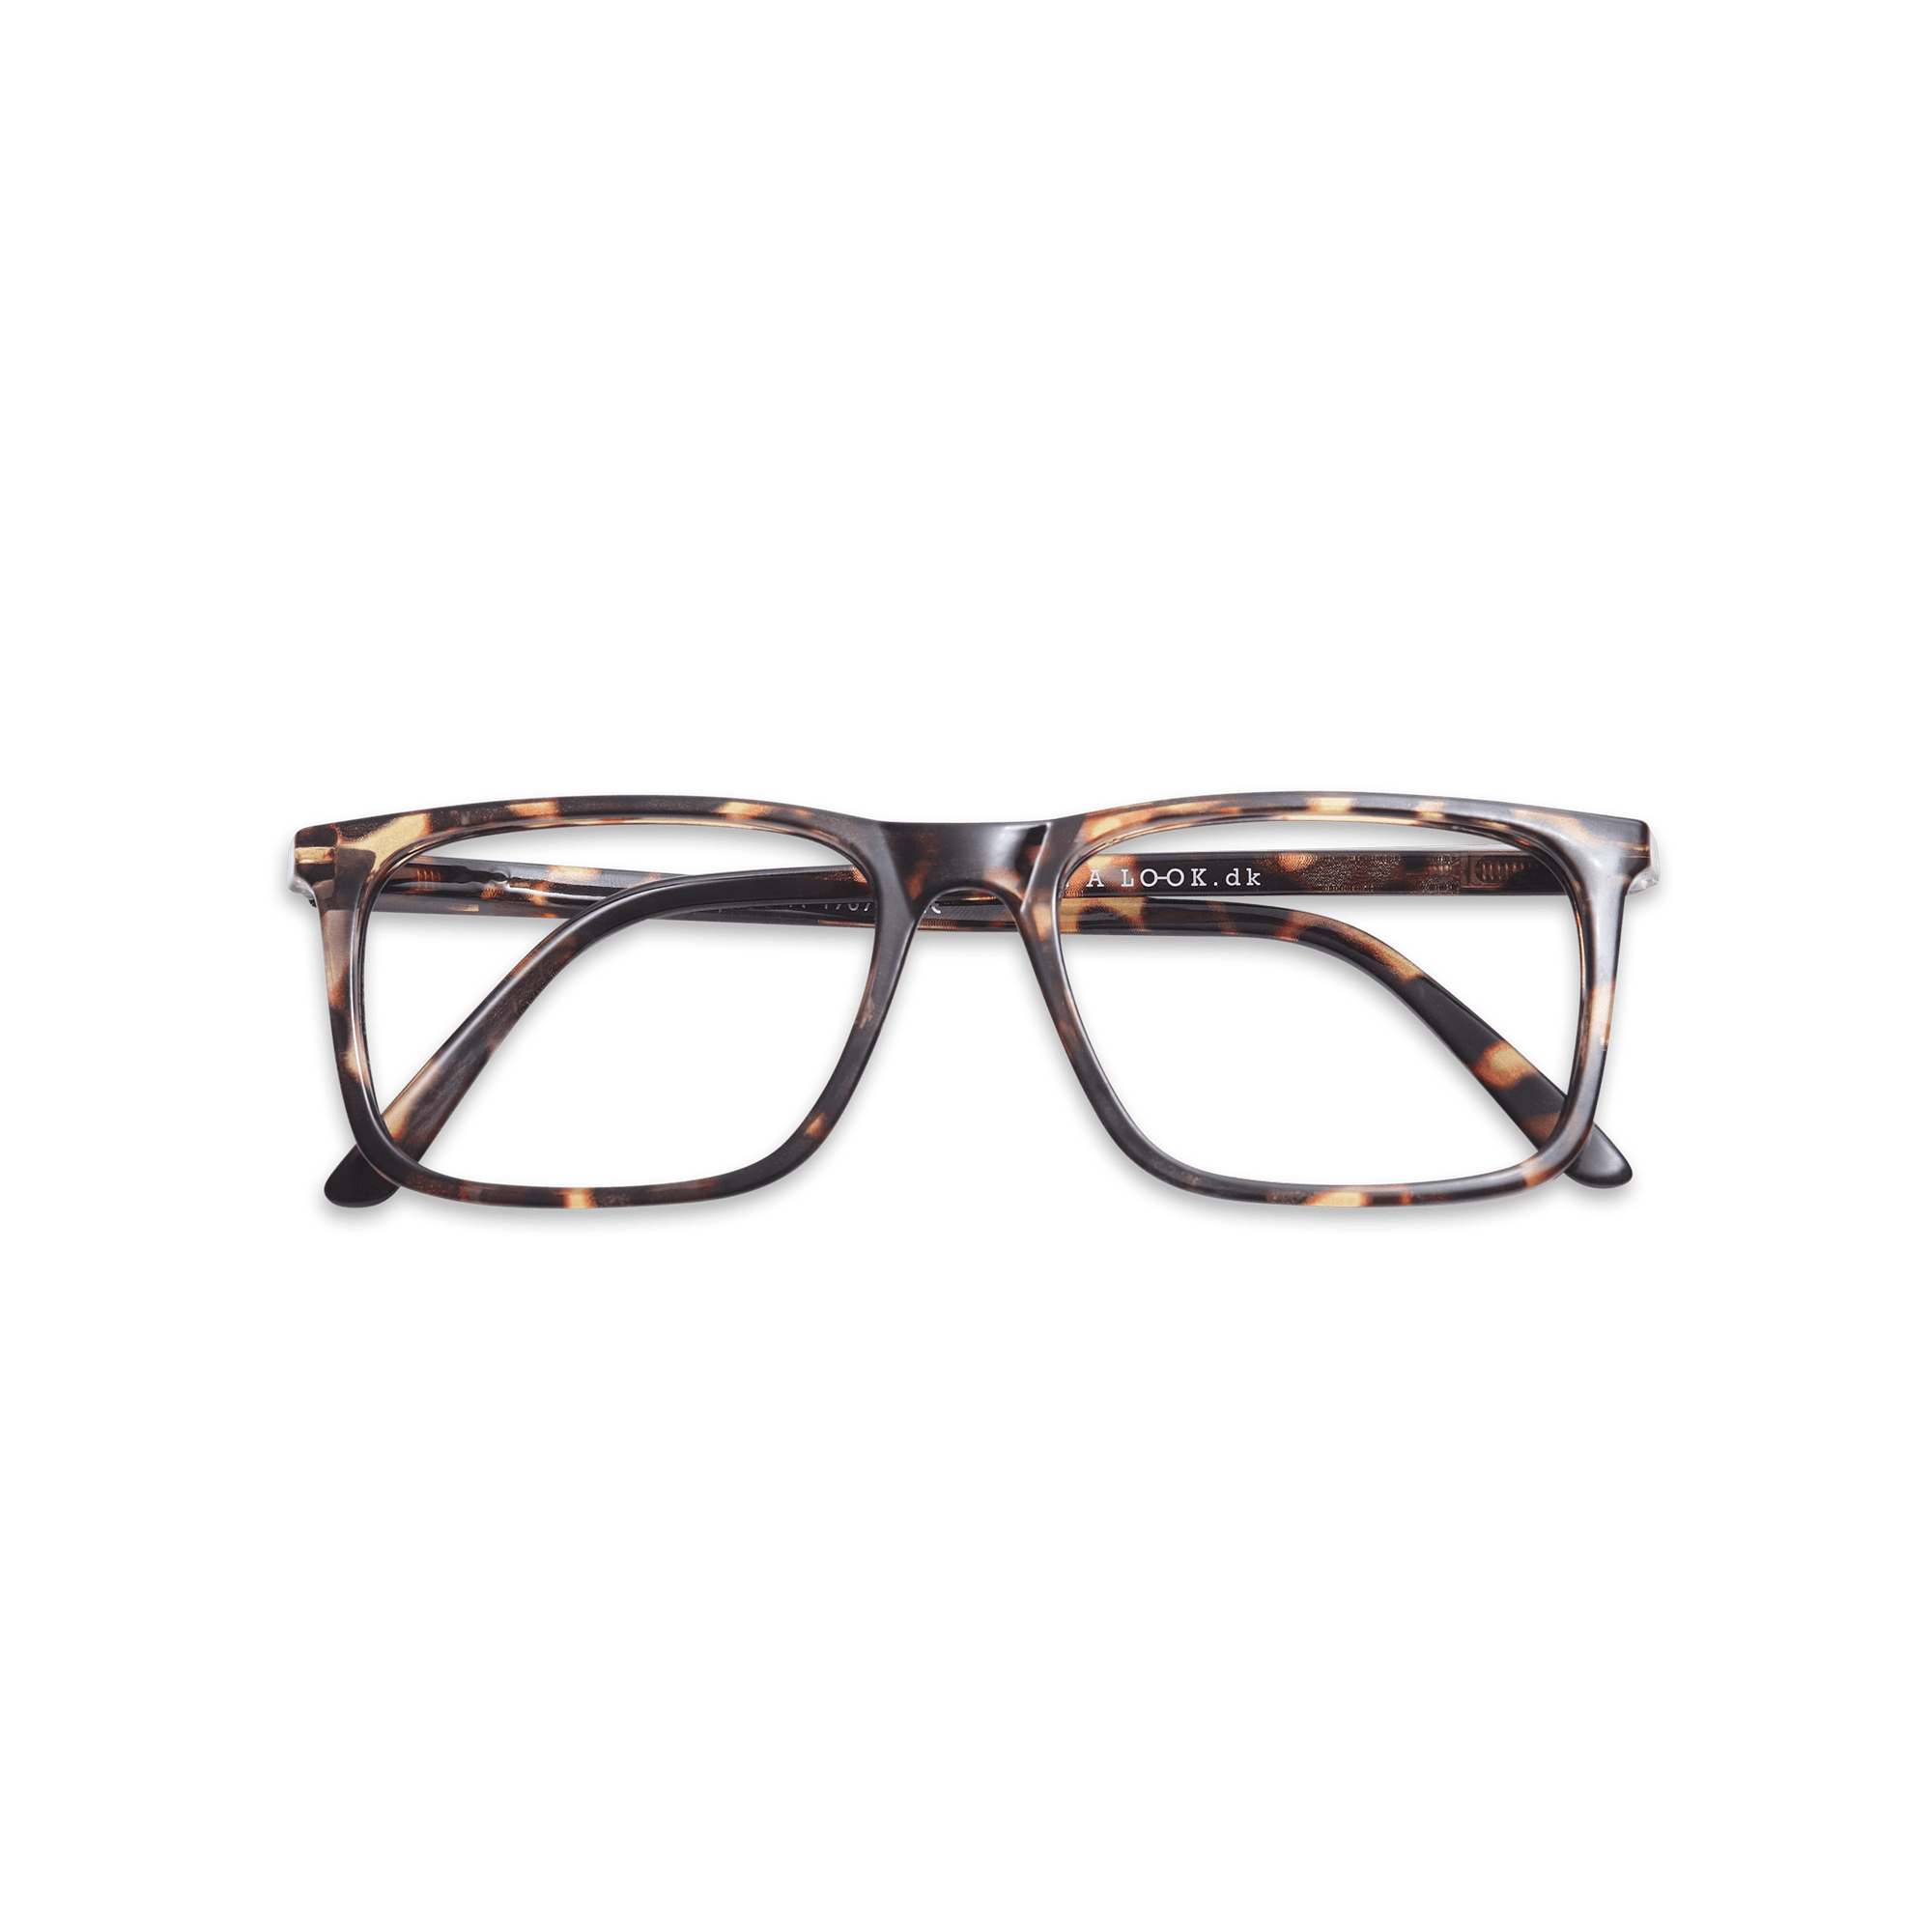 Clear lens glasses Type A - tortoise